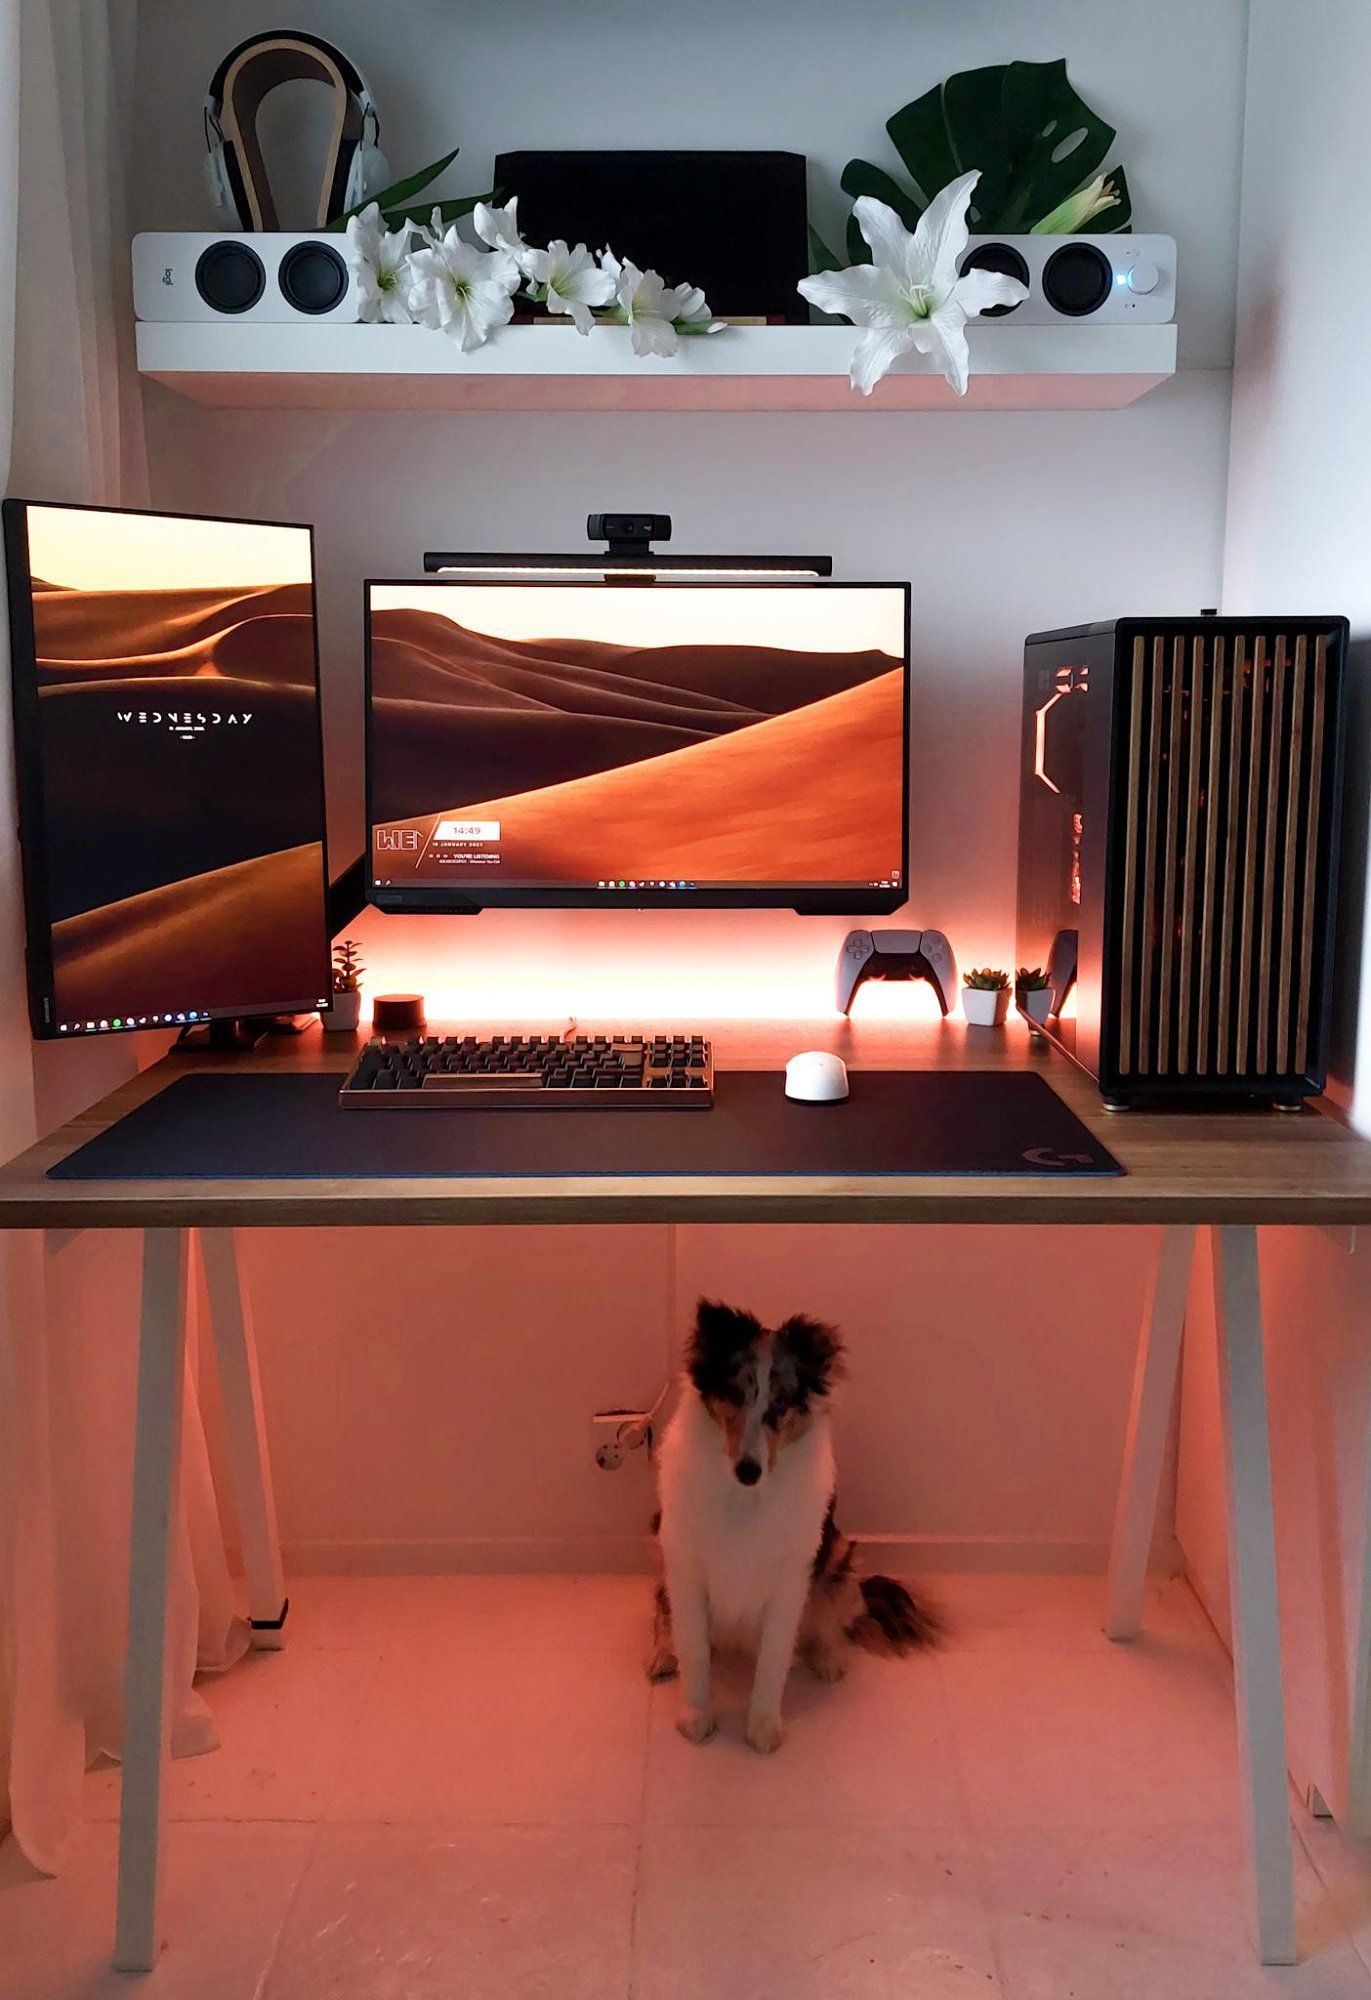 A minimalist desk with a single monitor, ambient backlighting, floating shelf with plants and headphones, accompanied by a friendly dog